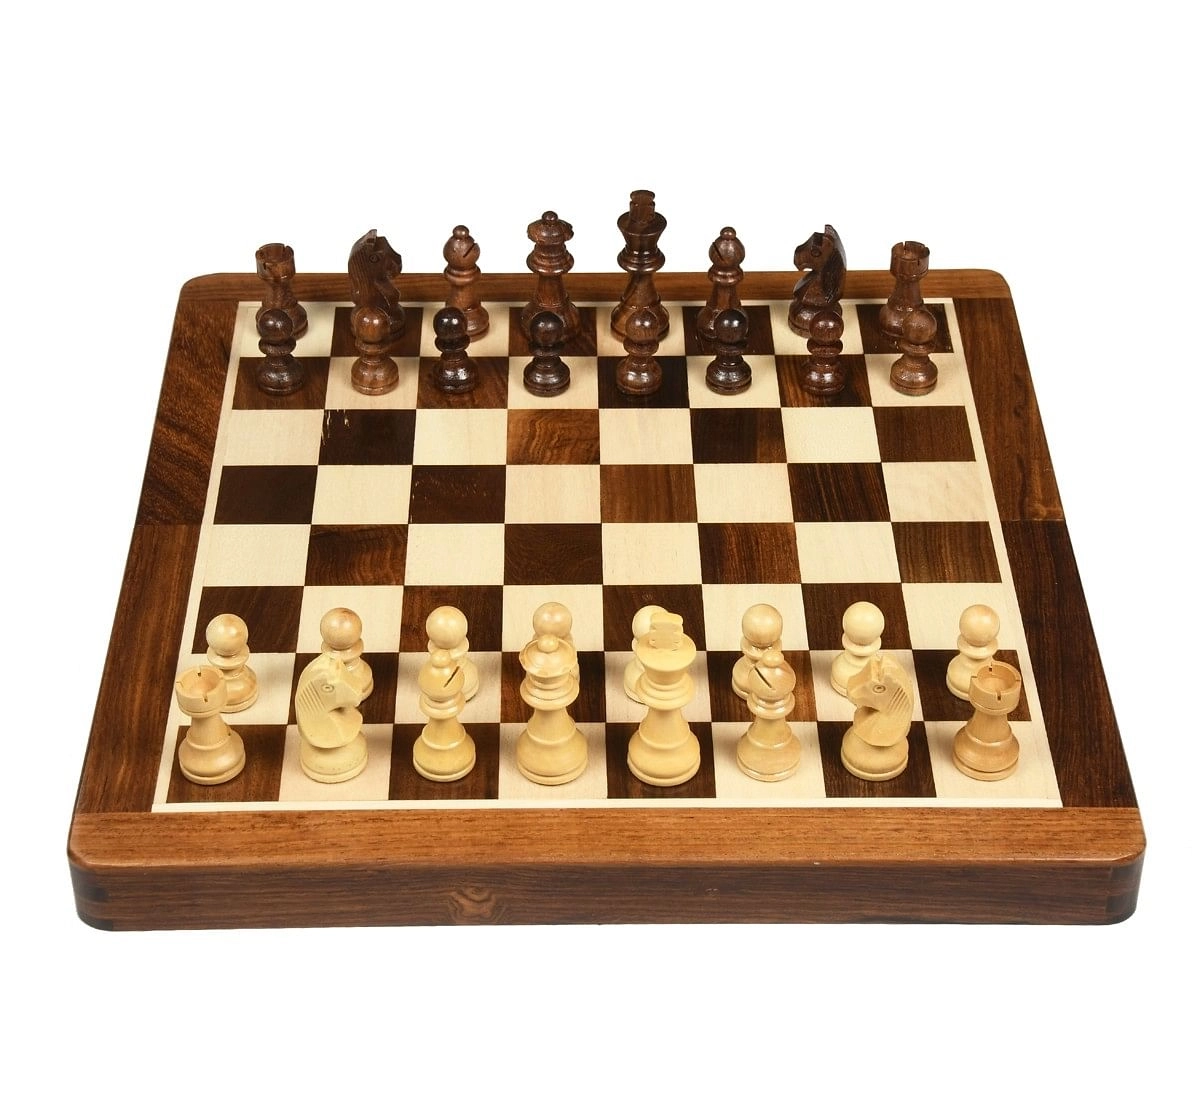 Hamleys 12 inches Wooden Travel Folding Sheesham Magnetic Chess Set for Kids 5Y+, Multicolour